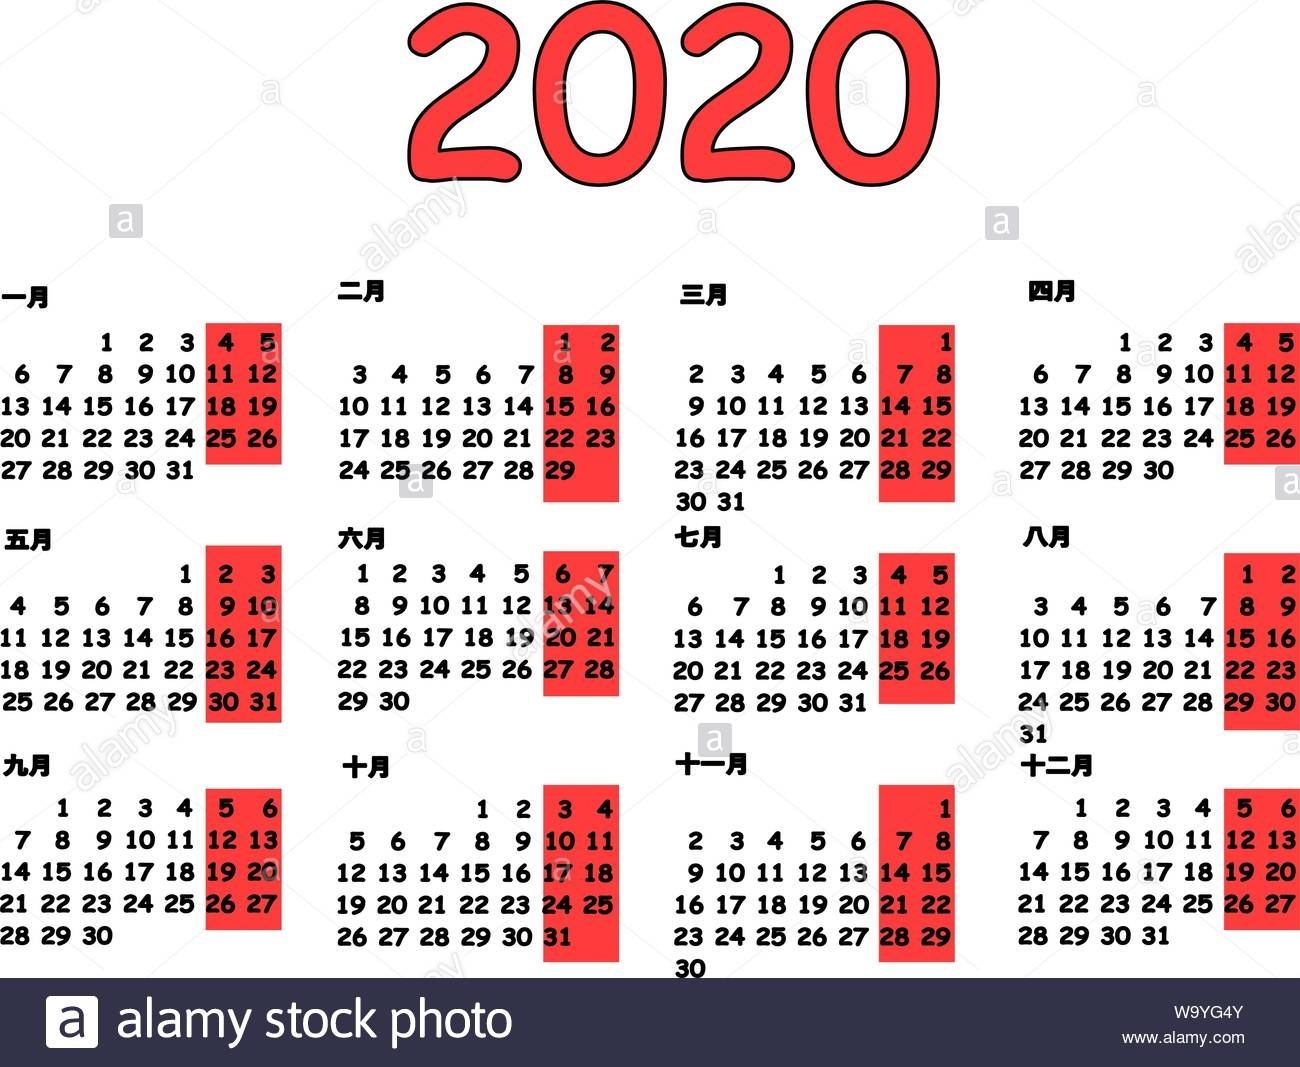 2020 Calendar Grid Chinese Language. Monthly Planning For 2020 Calender With Luner Dates